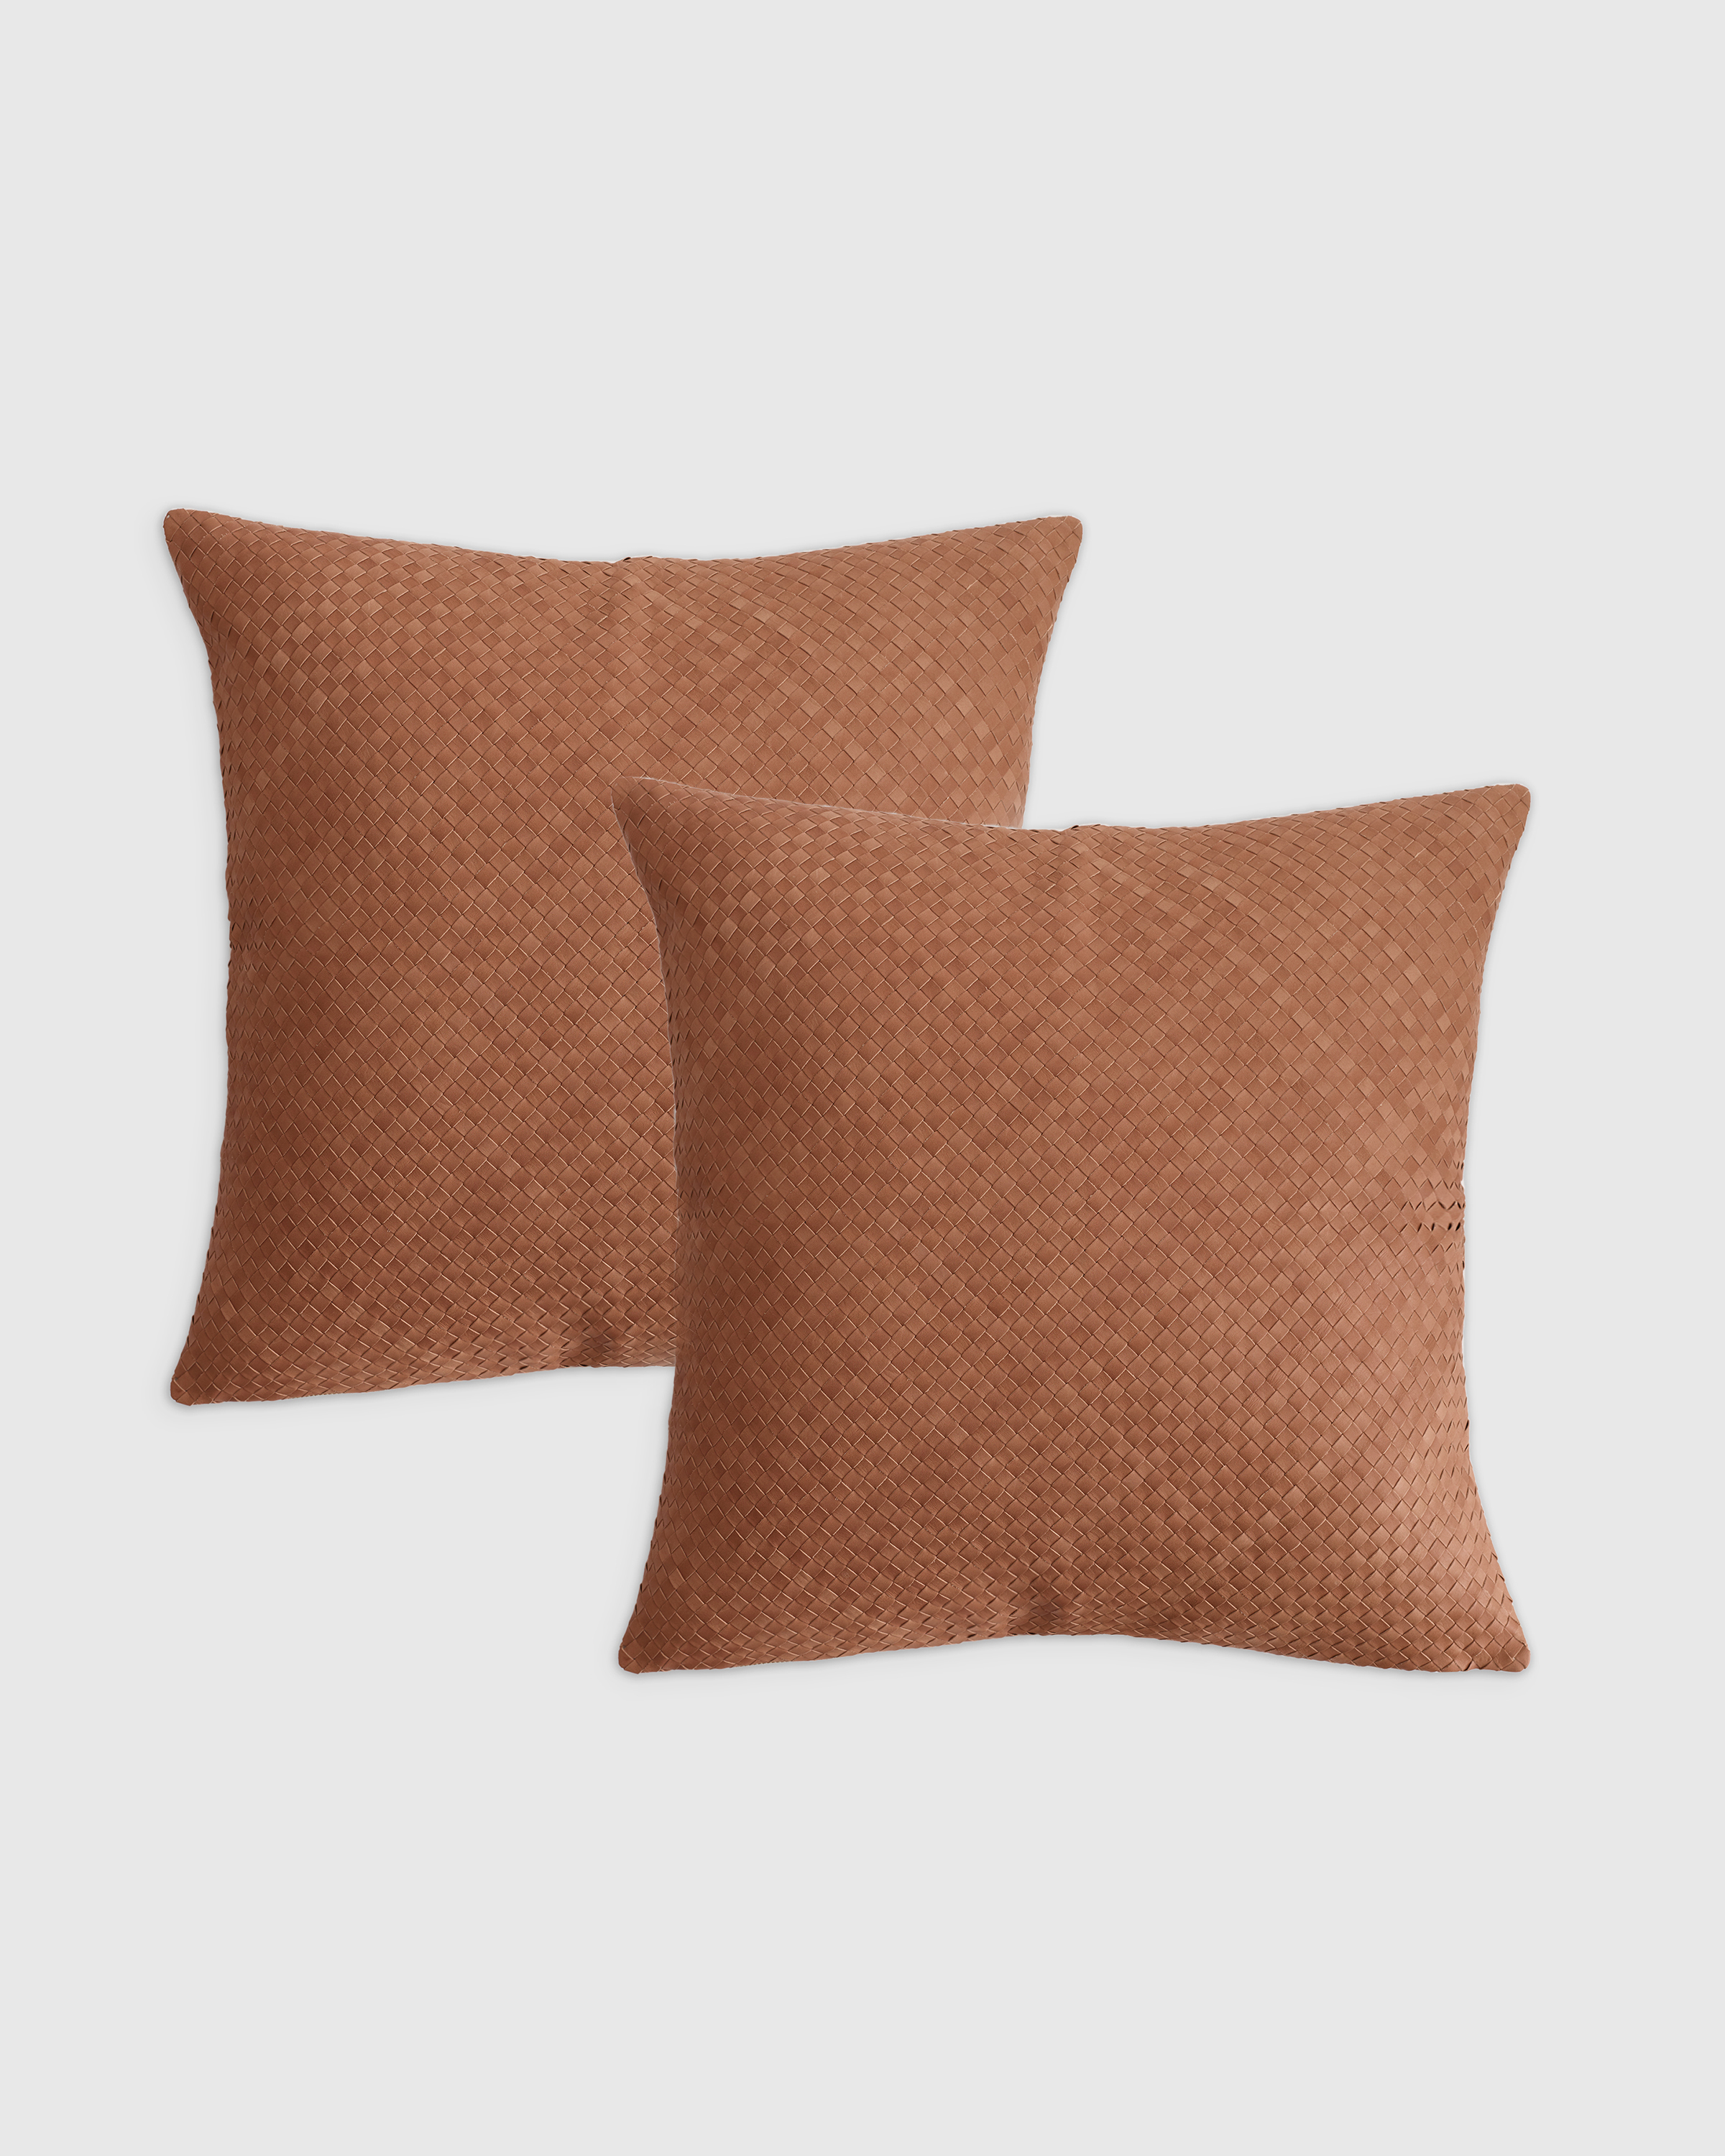 Quince Woven Leather Pillow Cover Set Of 2 In Brown